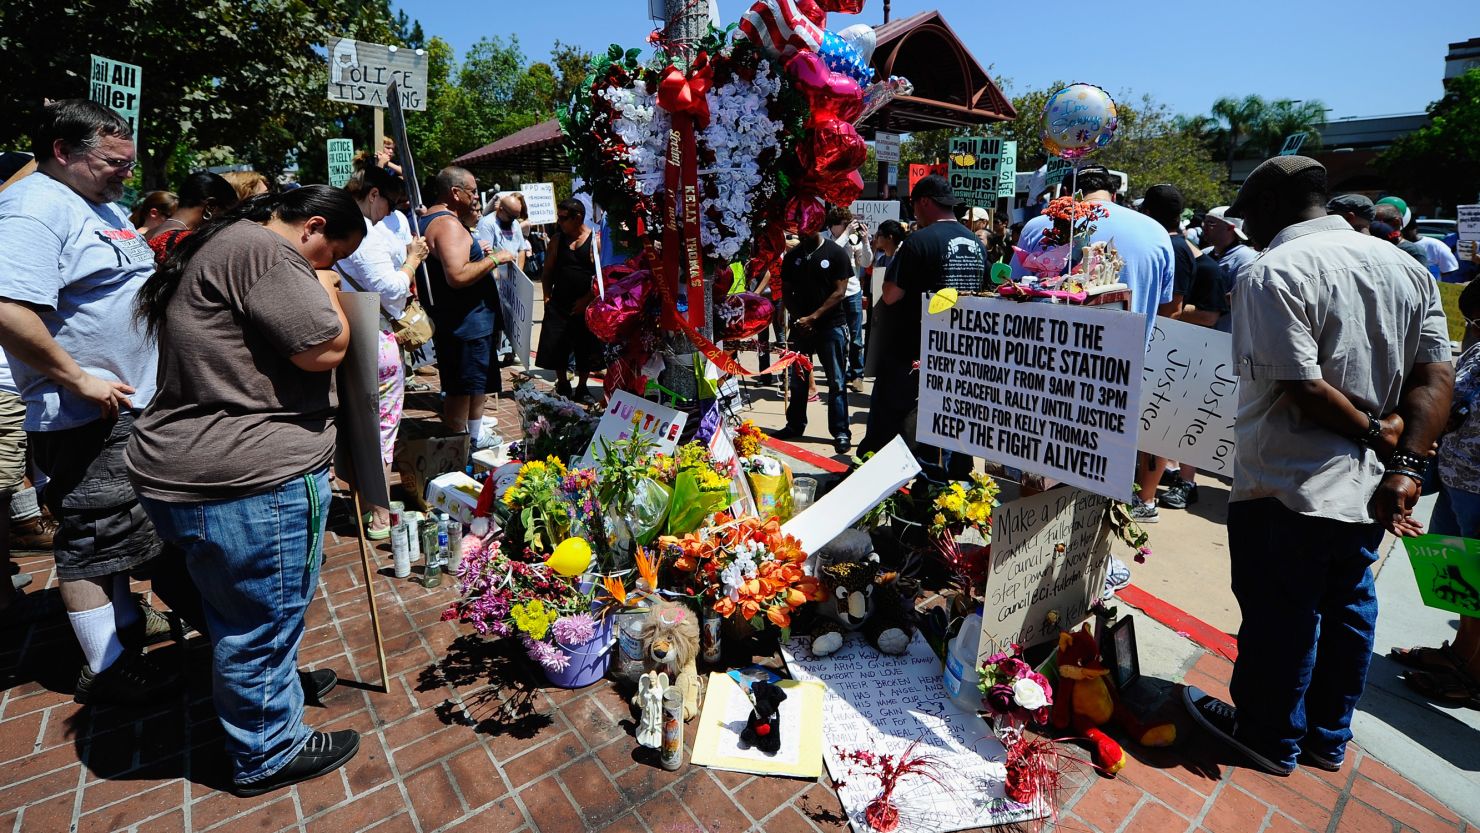  Demonstrators hold a moment of silence at a makeshift memorial for Kelly Thomas, a homeless man who died after an altercation with several officers, during a rally and protest march on August 20, 2011 in Fullerton, California. 